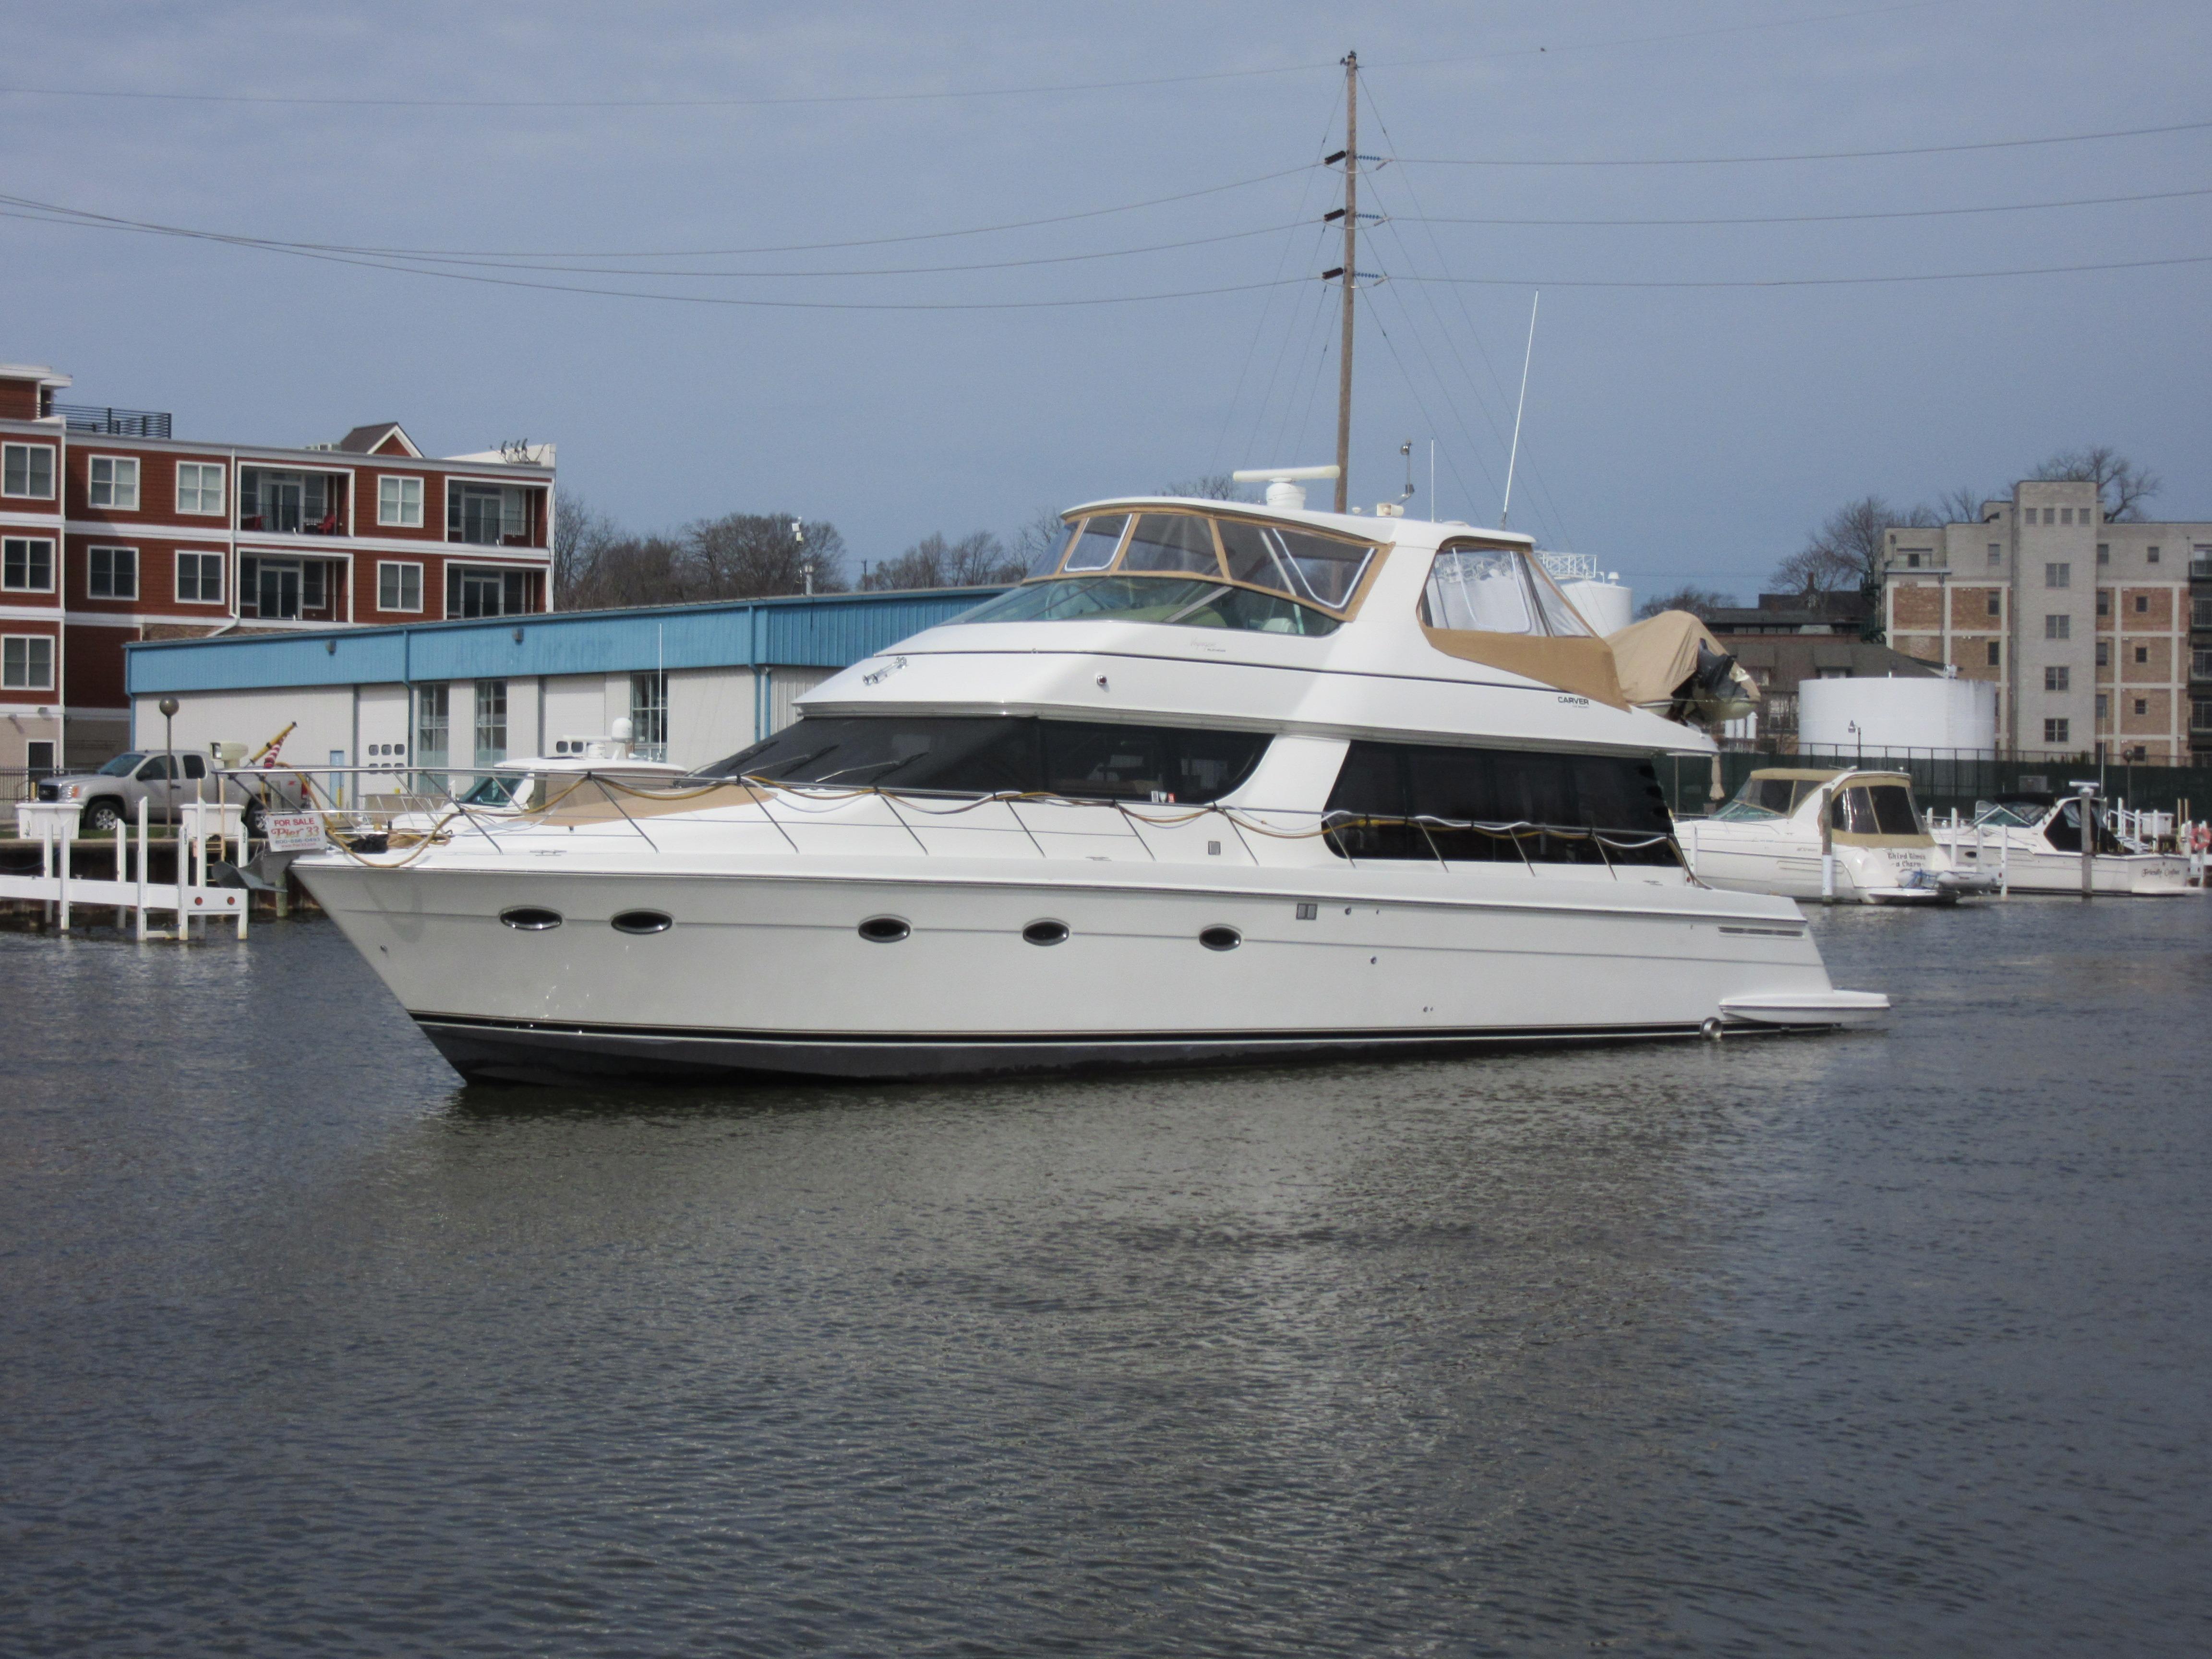 57 foot yacht for sale